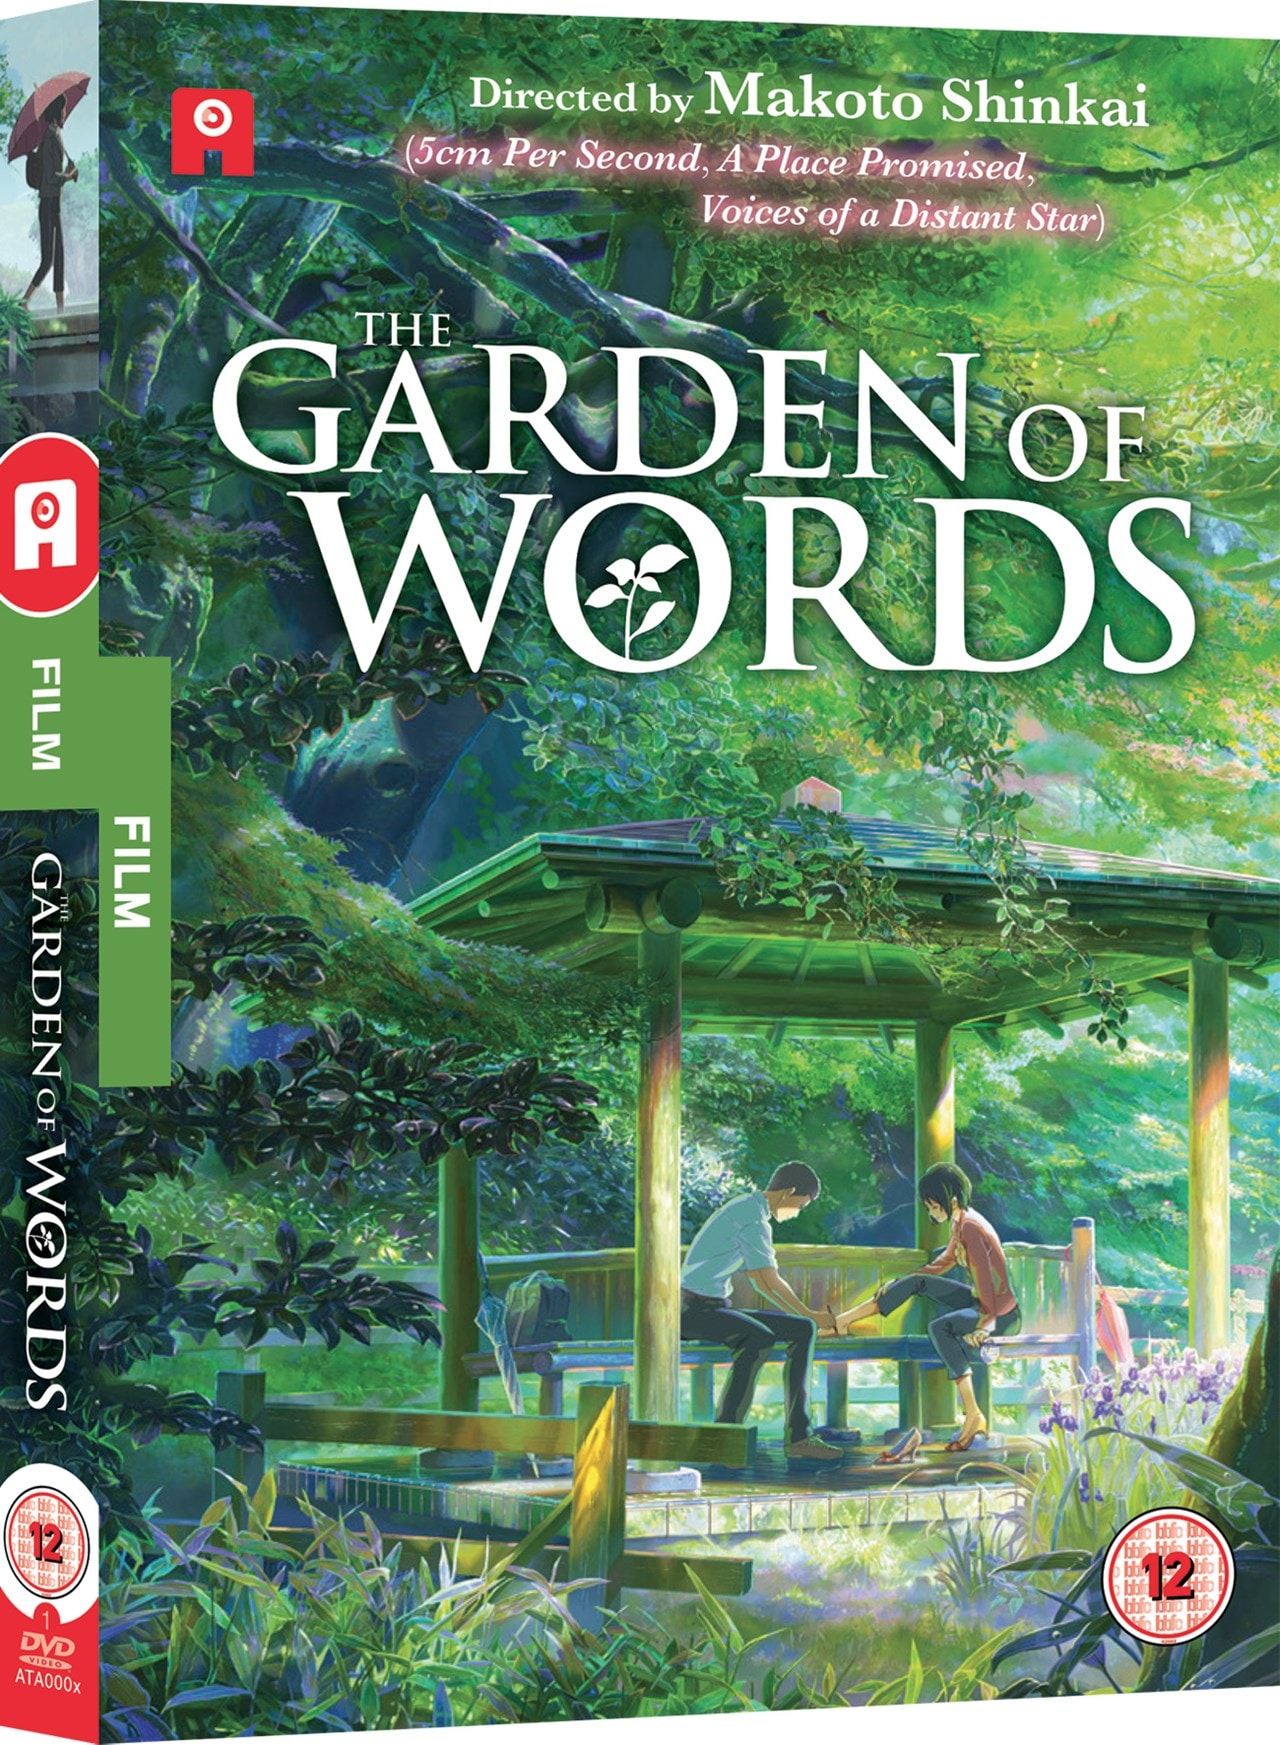 The Garden Of Words Dvd Free Shipping Over 20 Hmv Store